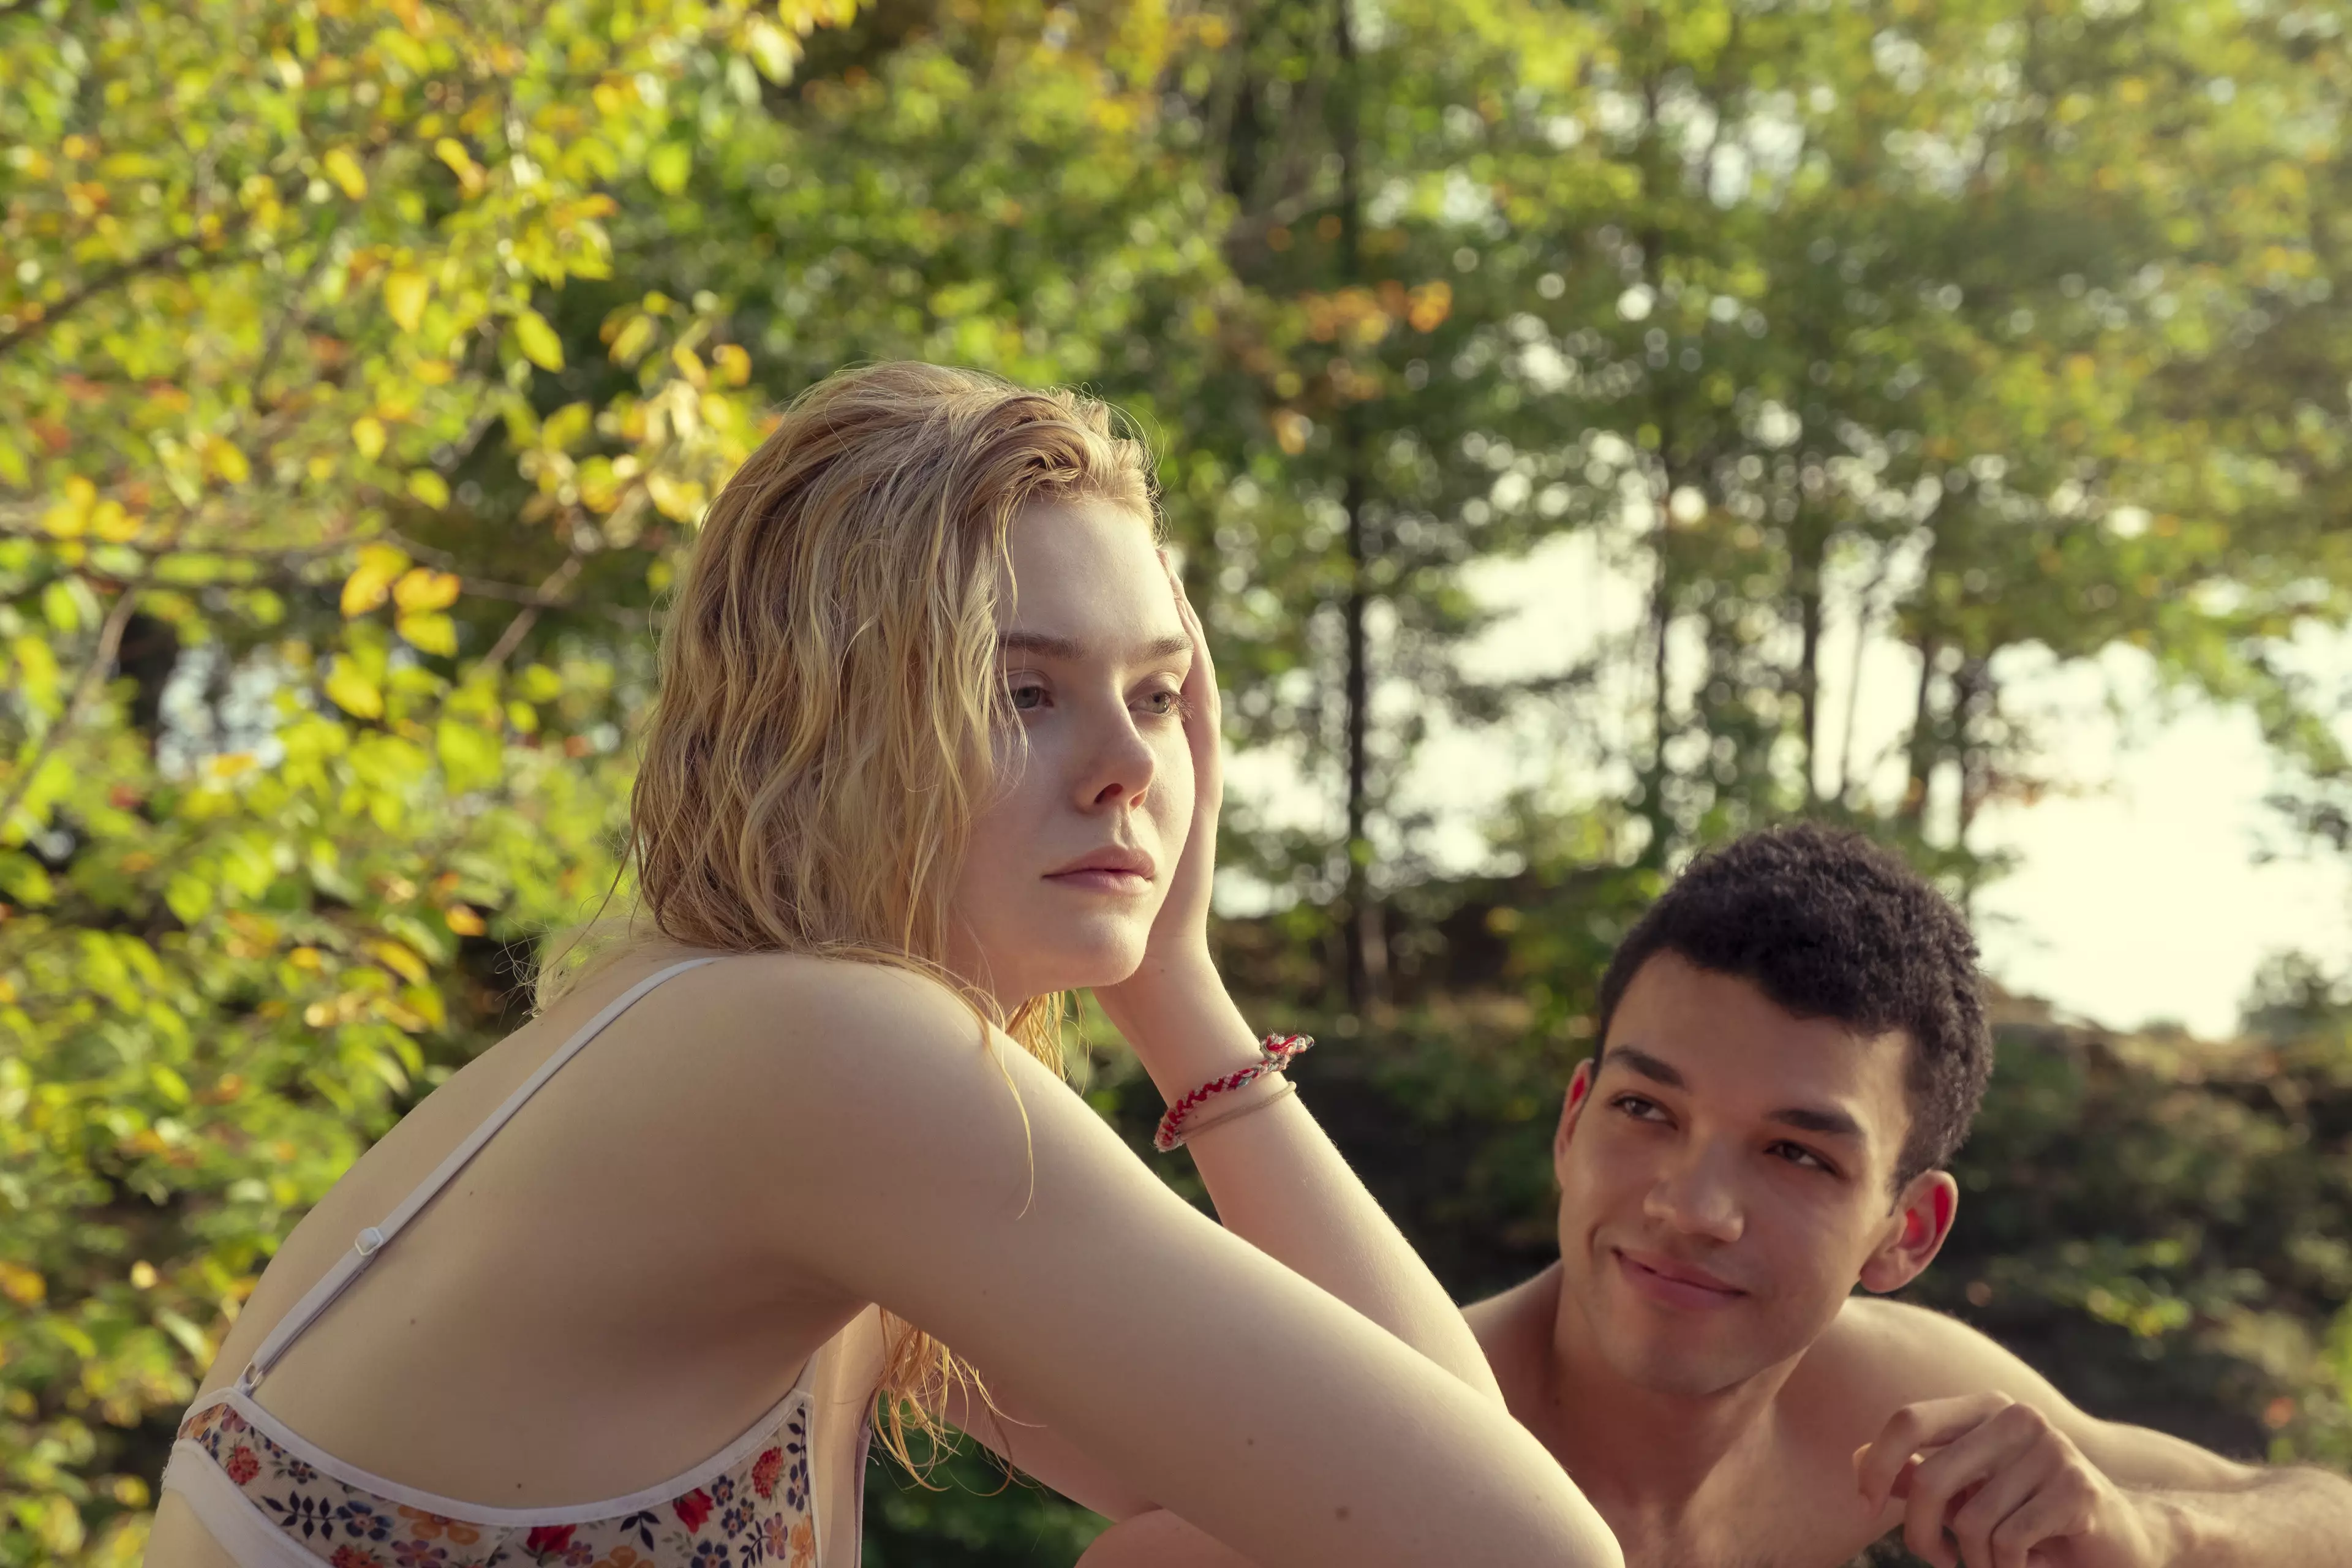 Theodore Finch is played by Justice Smith whilst Violet Markey is played by Elle Fanning (